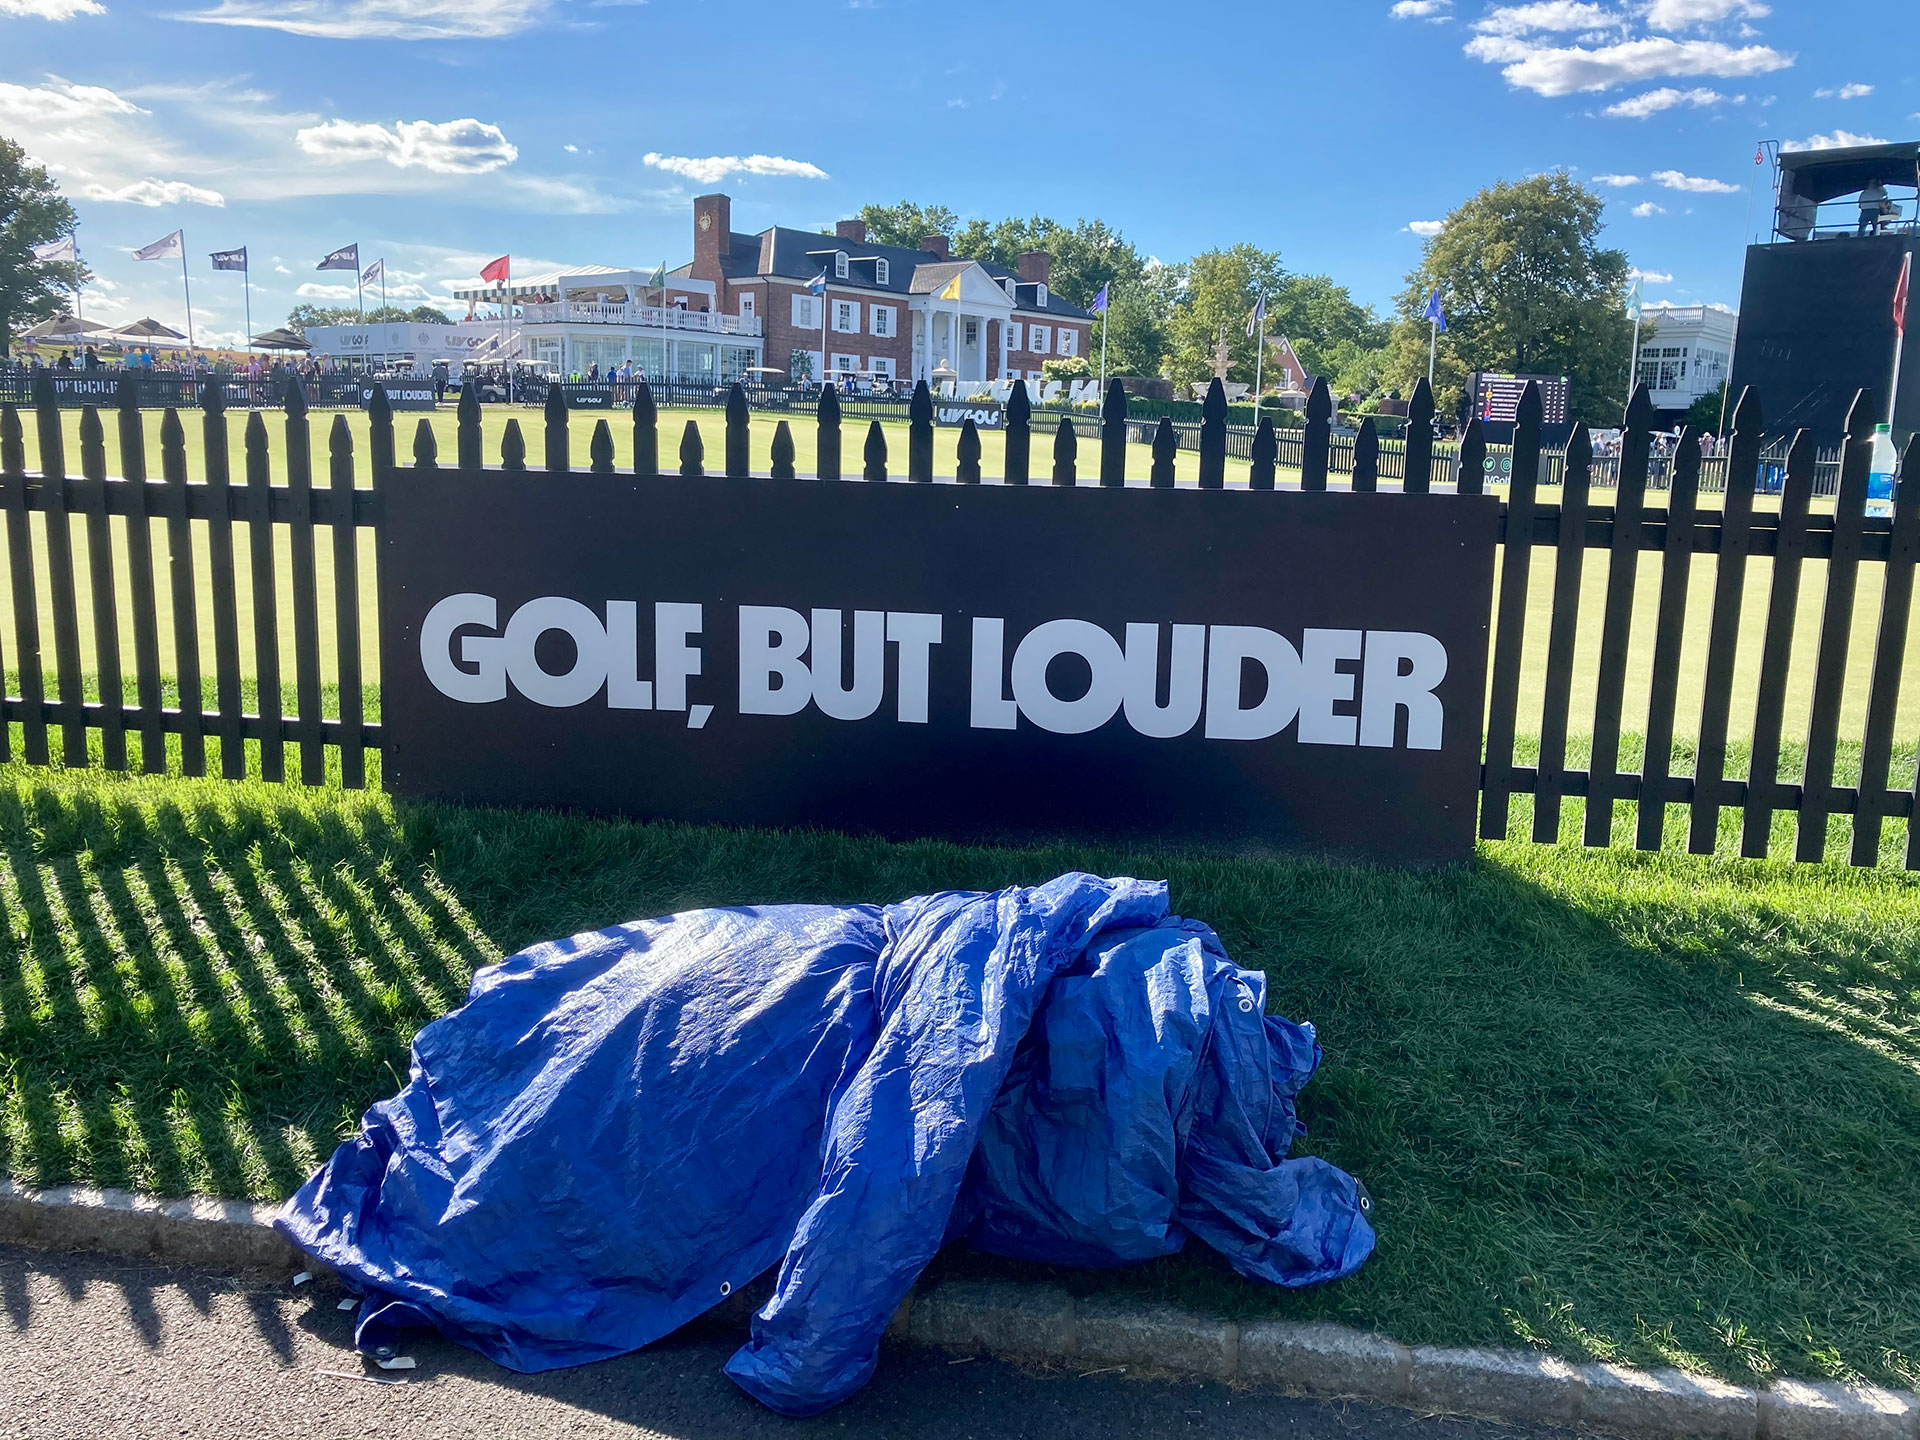 The slogan of the LIV Golf Tour is displayed prominently as the clubhouse at Trump National Golf Club Bedminster is seen in the background